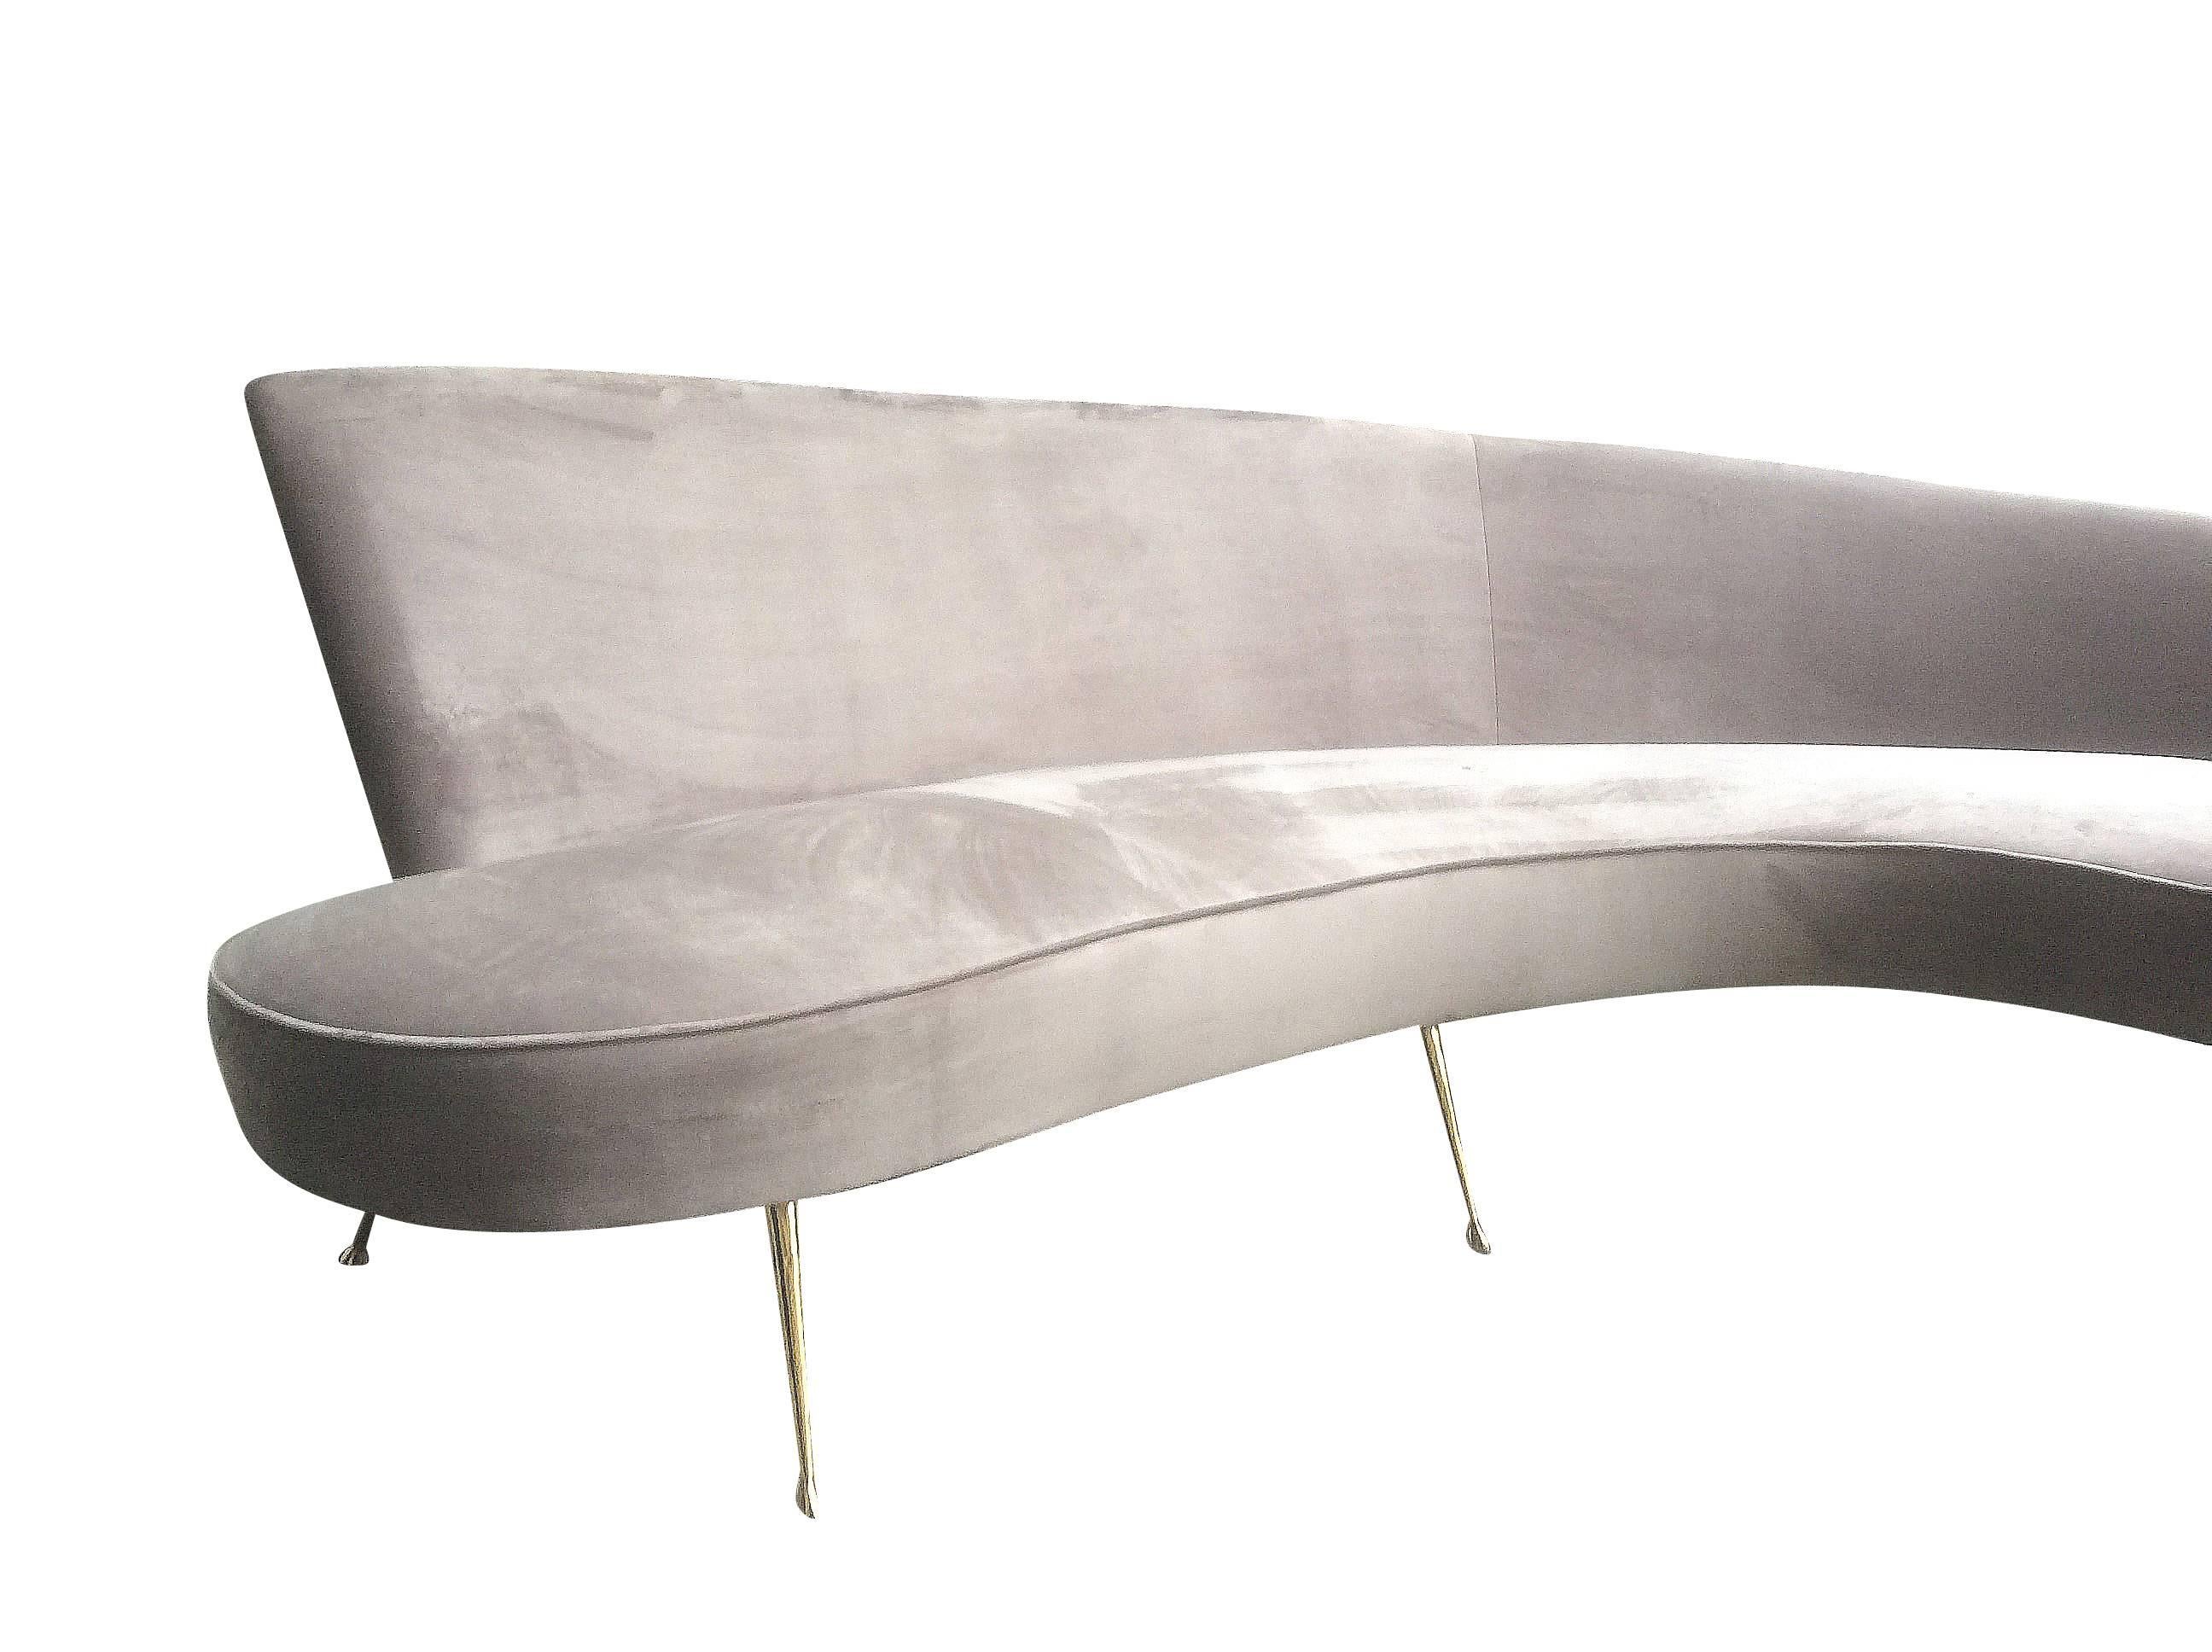 Contemporary Large Italian Curved Sofa in 1950s Style